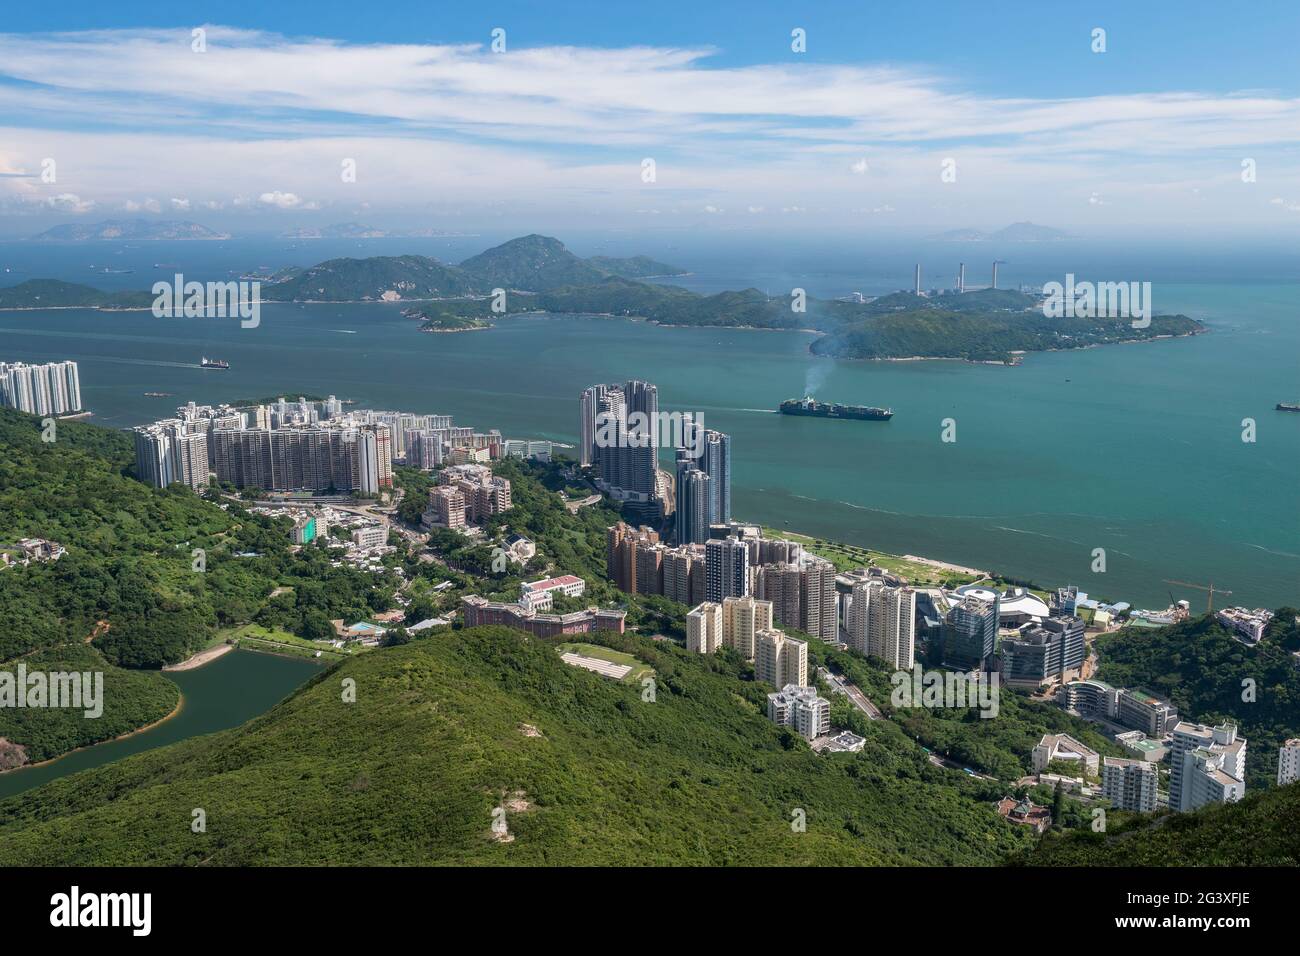 Ships in East Lamma Channel steam past tech hub Cyberport and the high-rise residential towers of Pok Fu Lam, Hong Kong Island Stock Photo